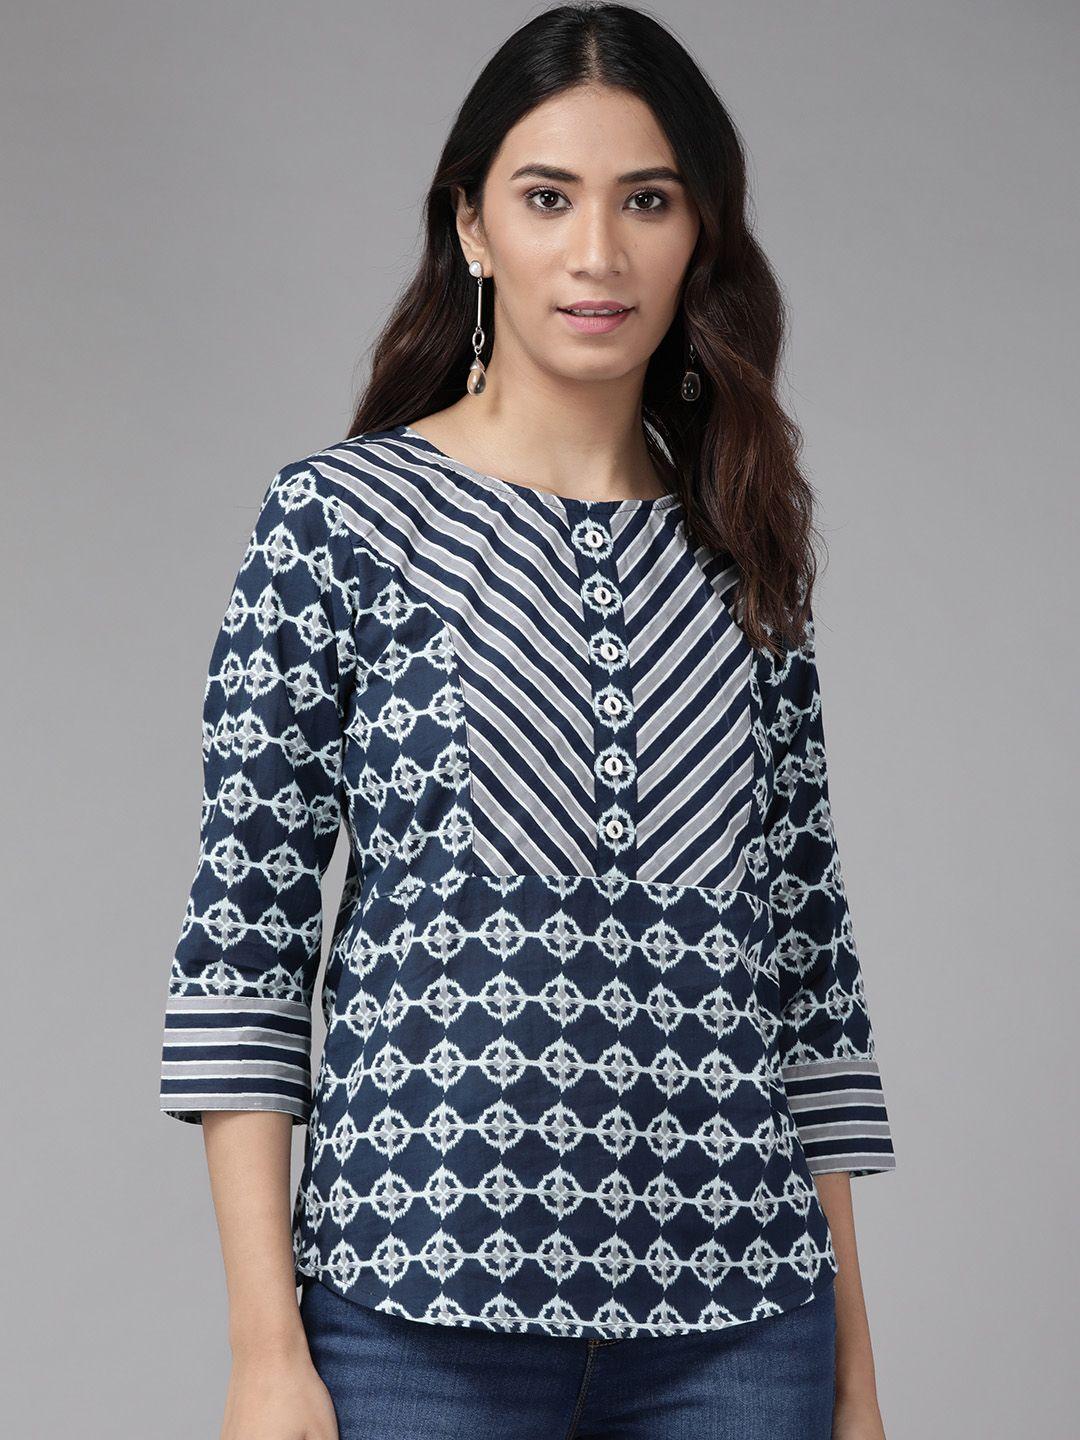 yash-gallery-navy-blue-&-white-printed-top